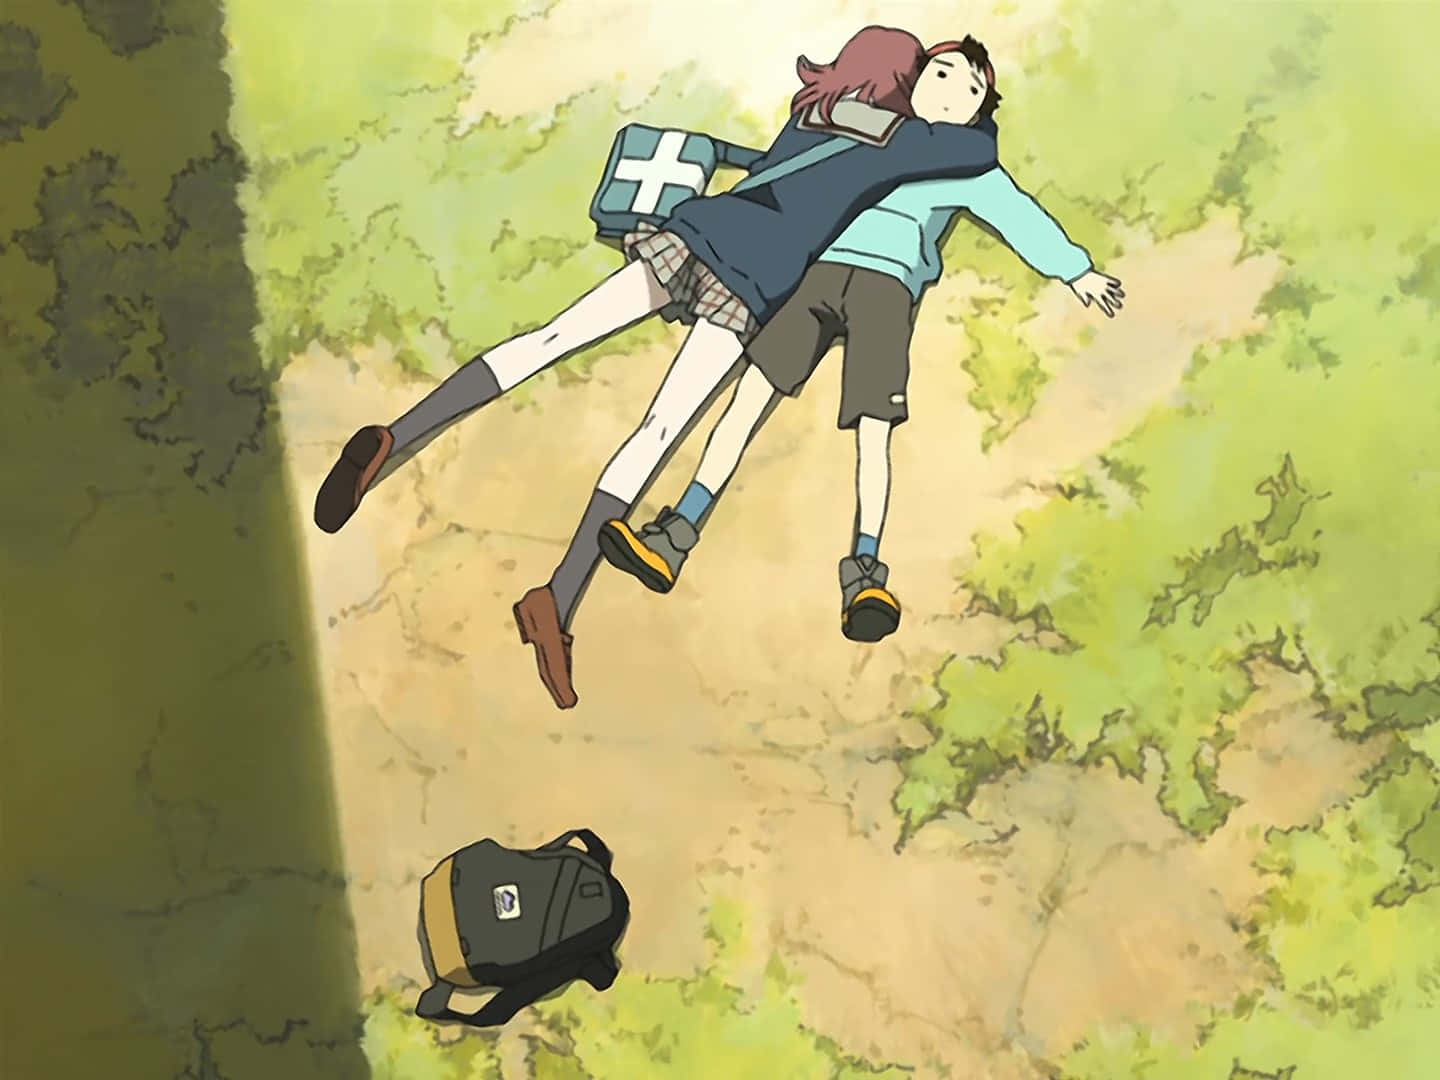 A still from the iconic anime series, FLCL